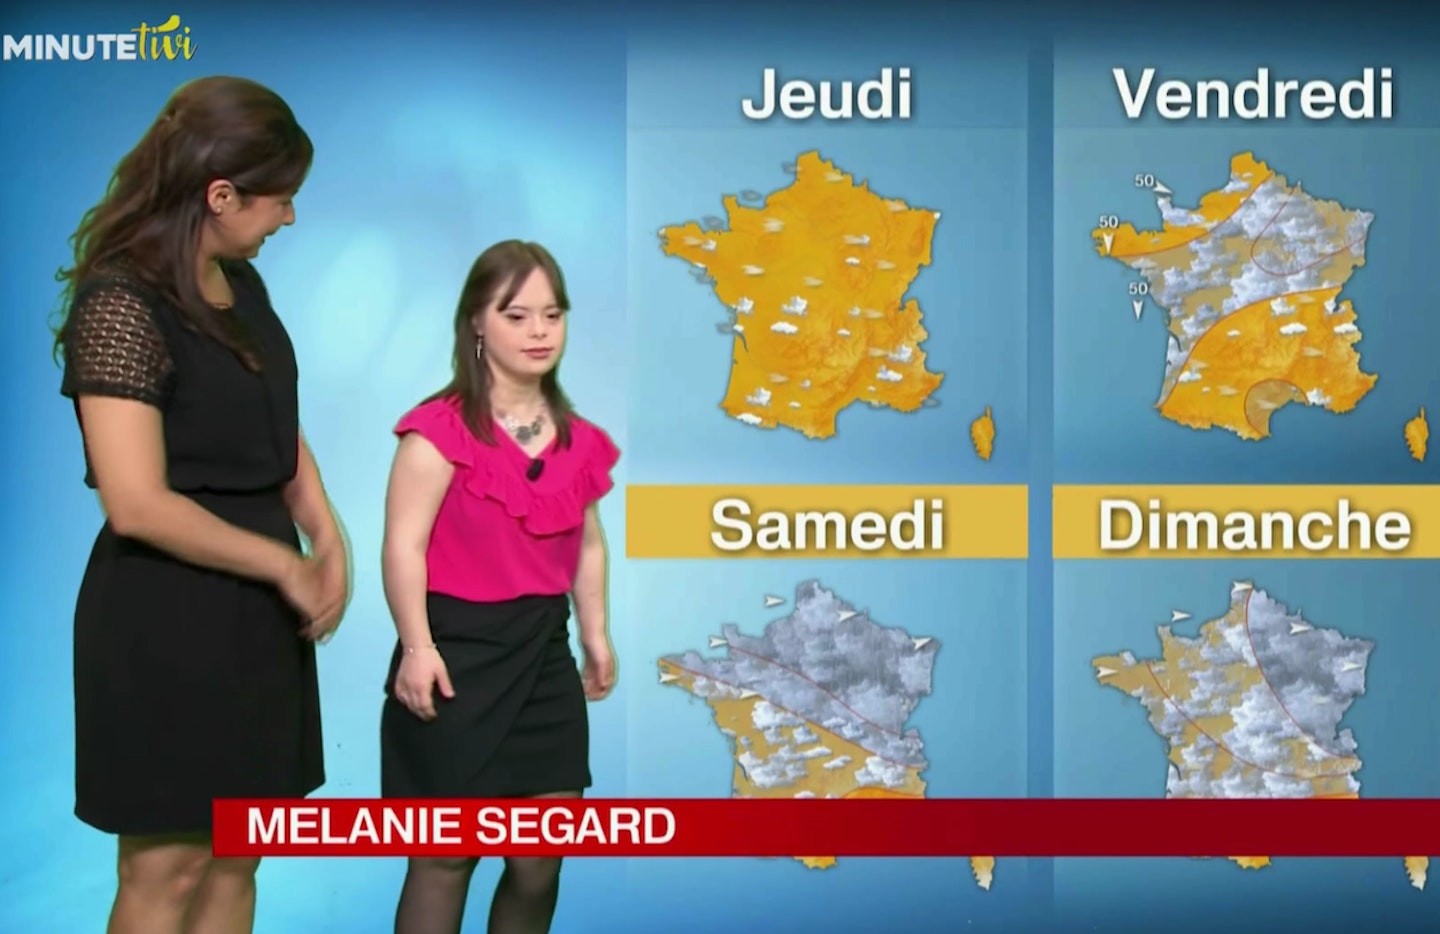 downs-syndrome-woman-dream-presenting-weather-reality-facebook-campaign-melanie-segard